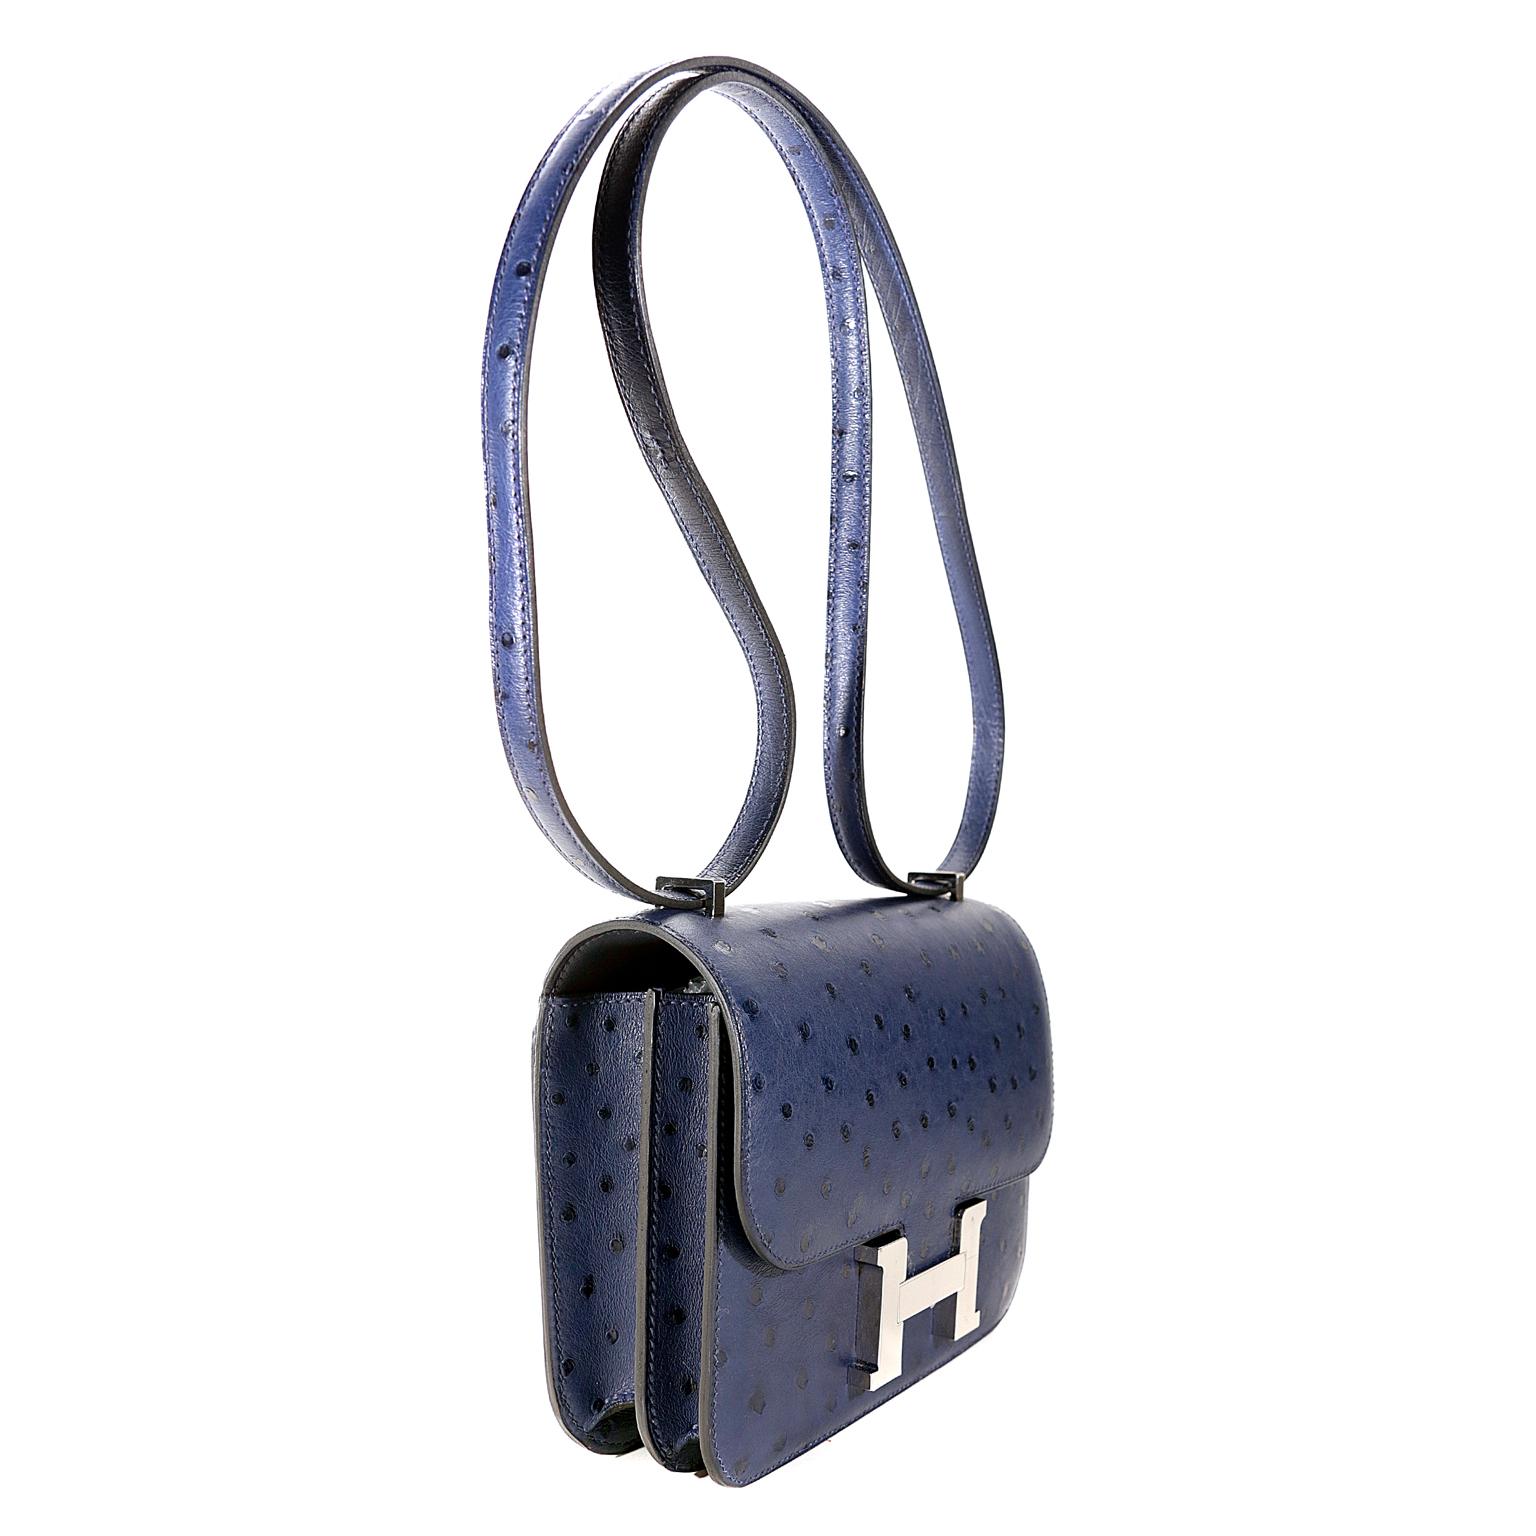 Hermès Blue Roi Ostrich Constance Mini 18 -PRISTINE  Unworn Condition
One of Jackie O’s favorite Hermès styles, she was often photographed wearing one of the many in her collection. This exotic ostrich version is extremely rare; a special piece for